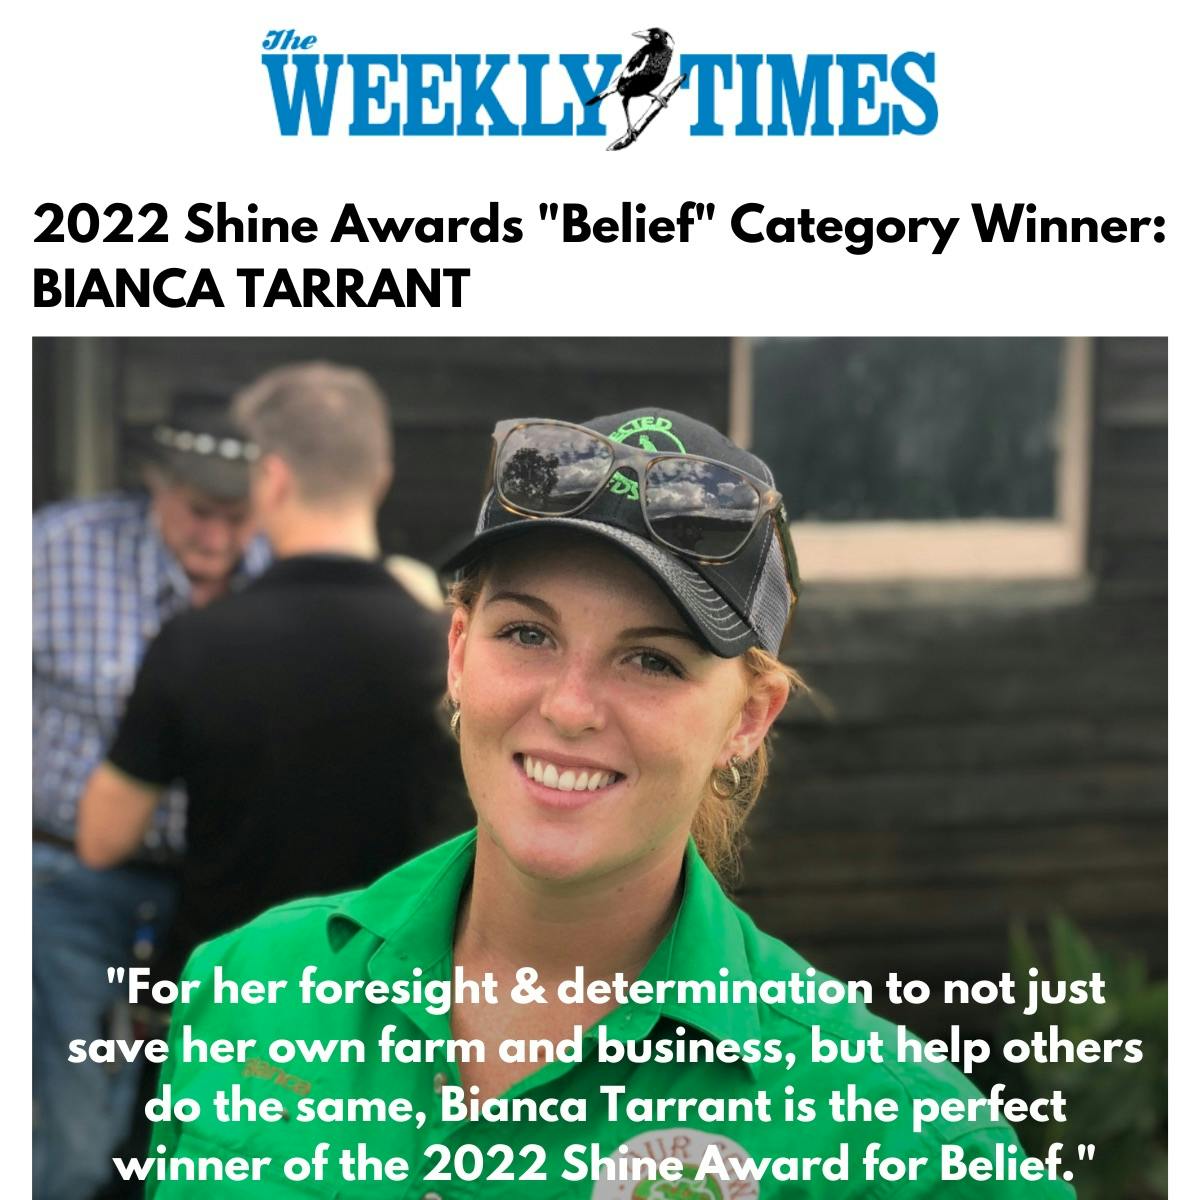 Our Cow Co-Founder Bianca Tarrant named 2022 Shine Awards "Belief" Winner